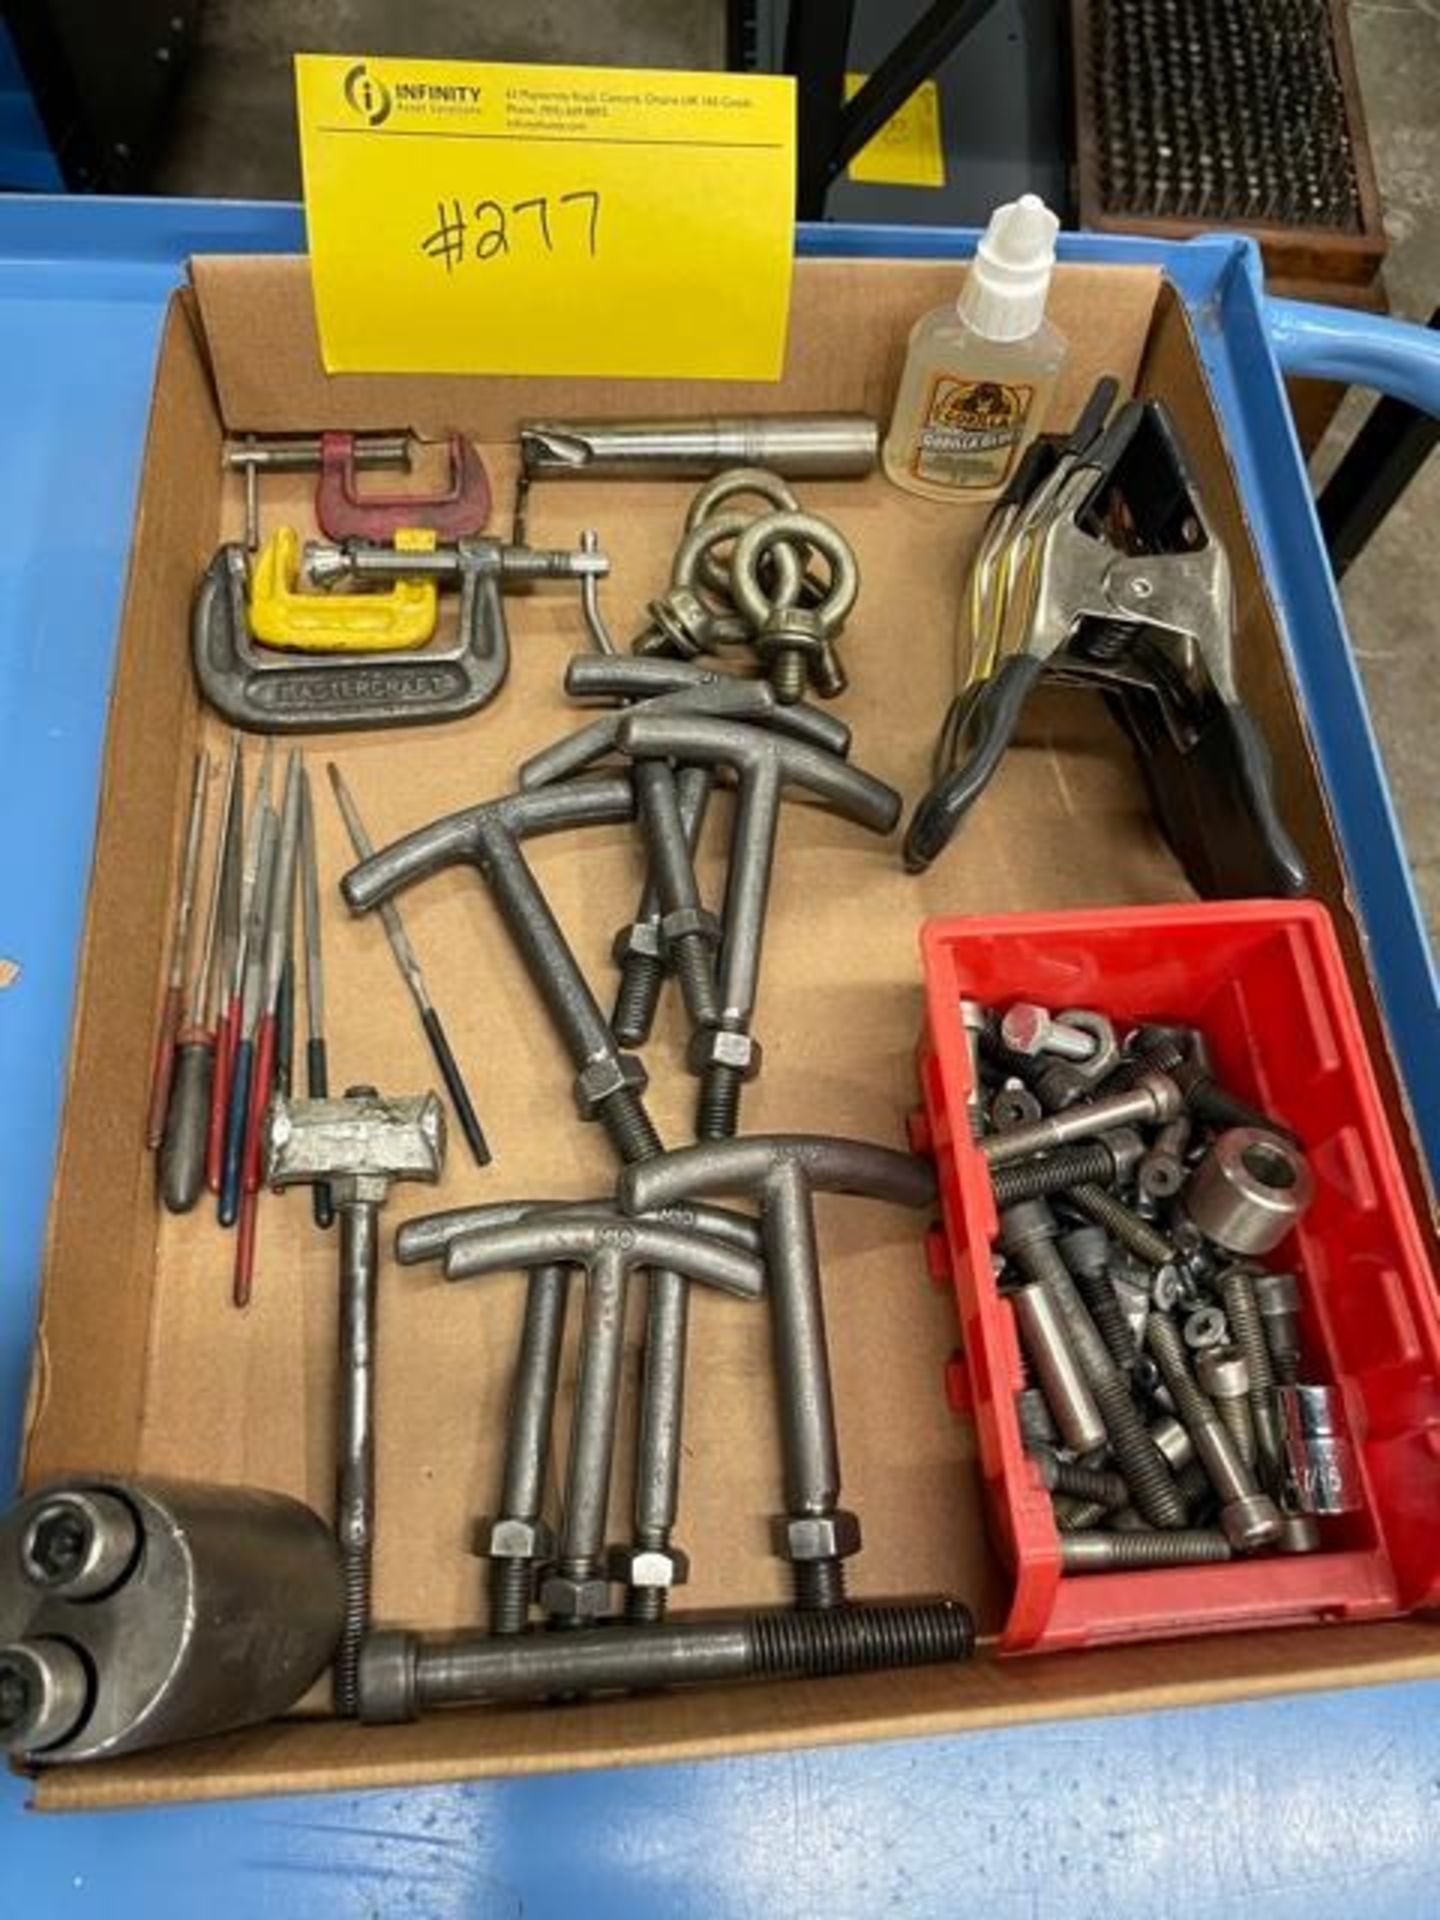 Jack screws, clamps and machine shop accessories